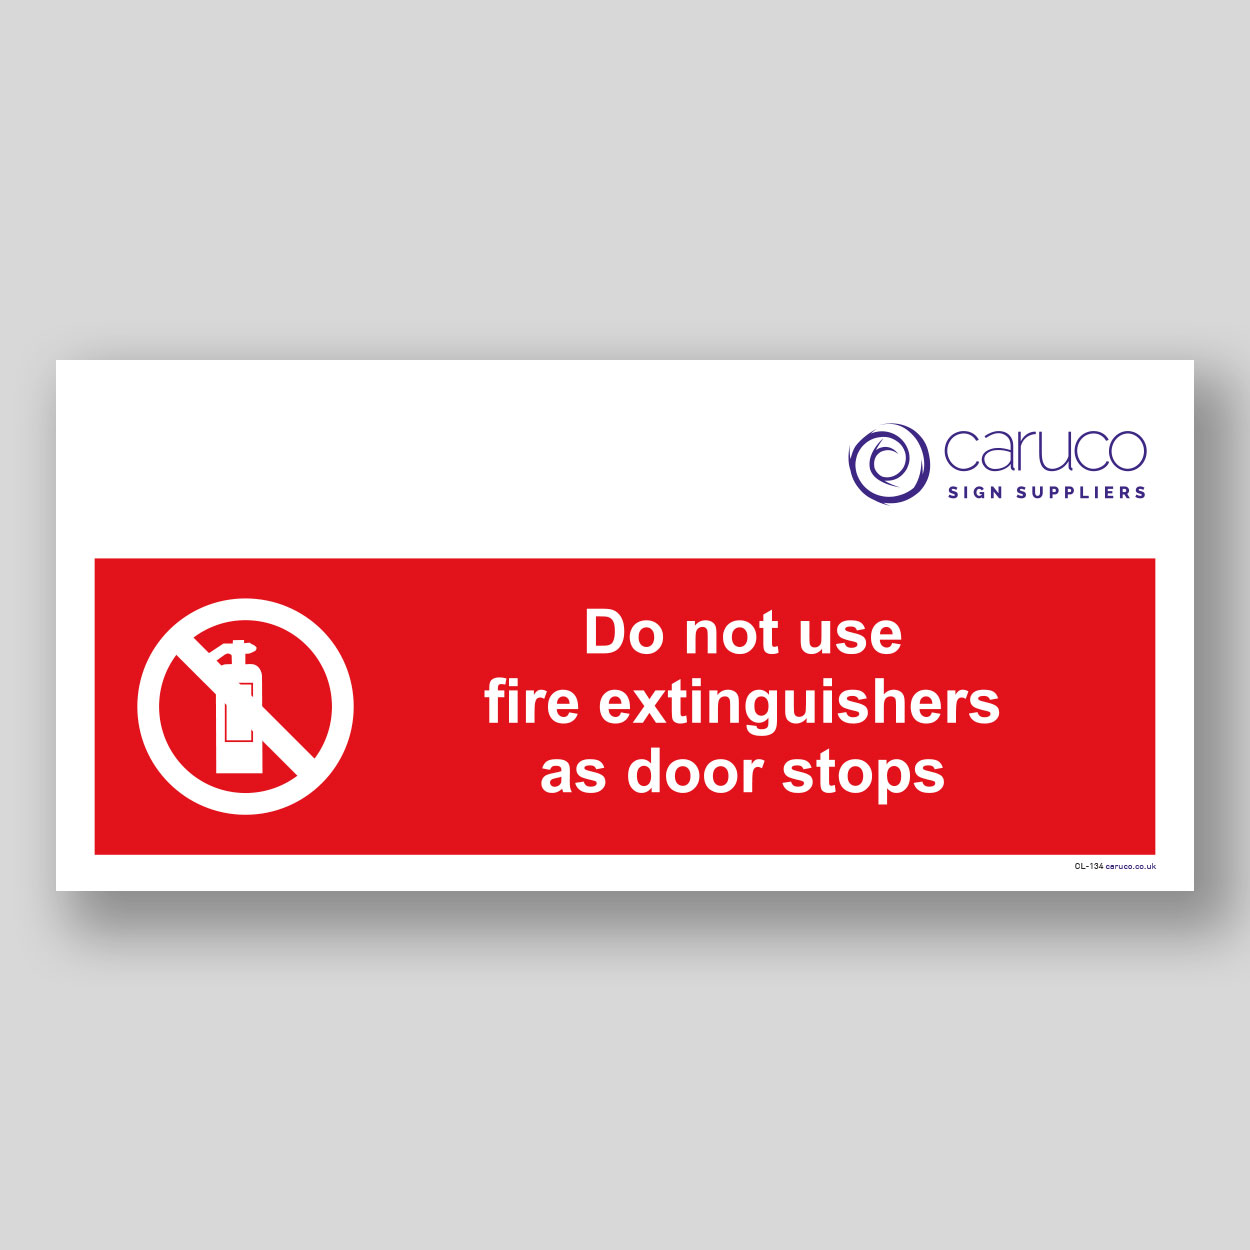 CL-134 Do not use fire extinguishers as door stops